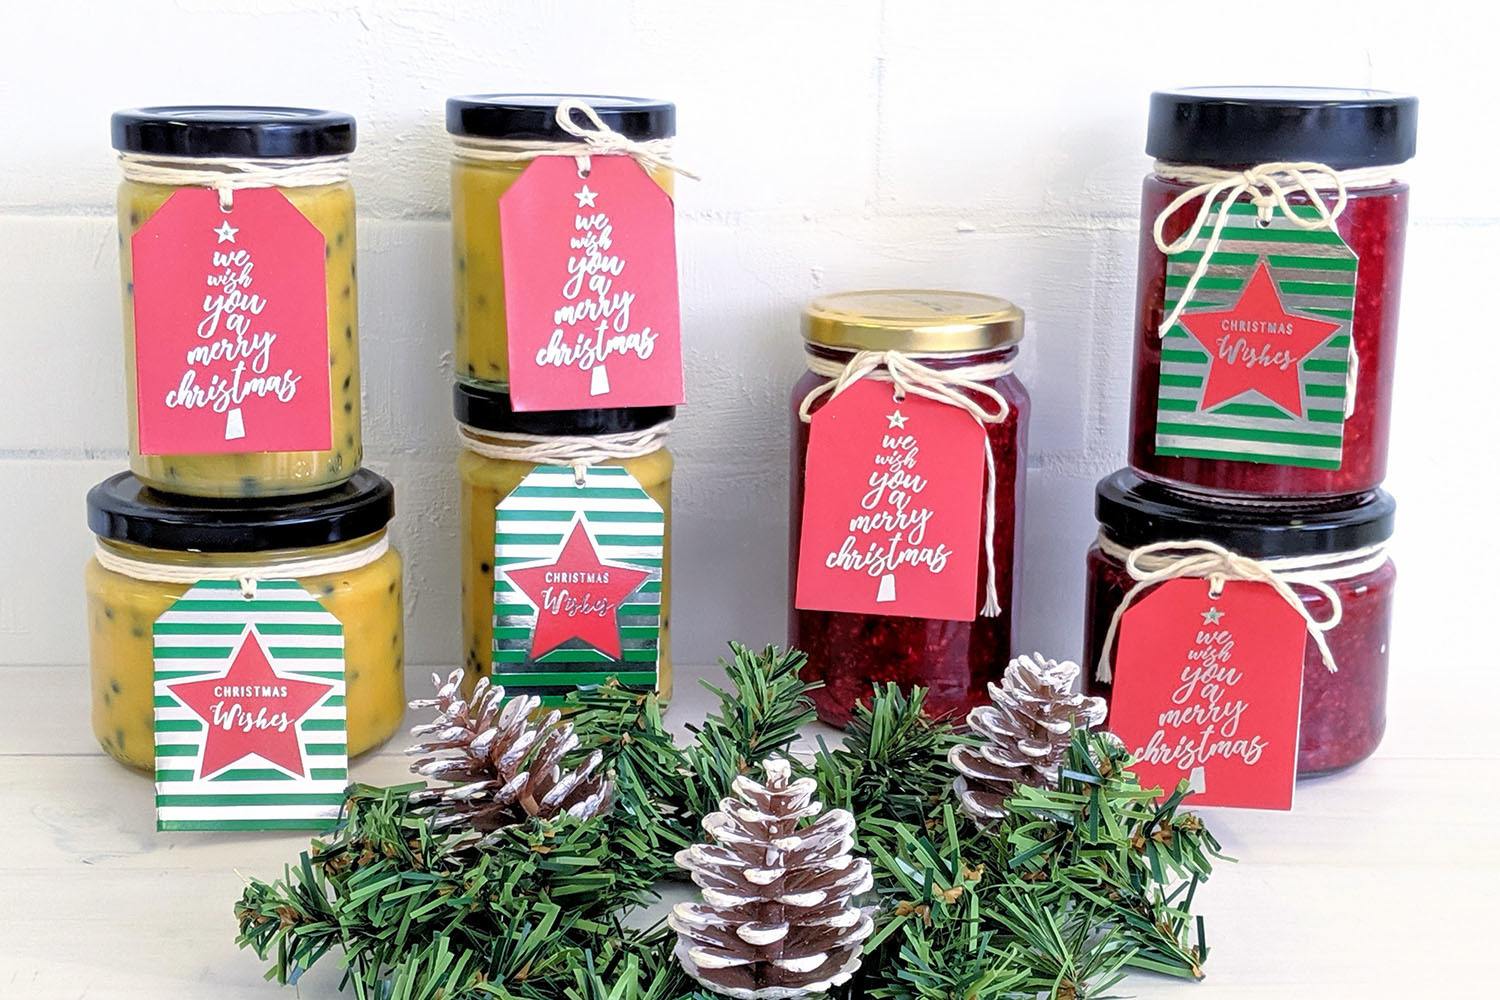 6 Healthy Food Gifts for Christmas - PBCo.